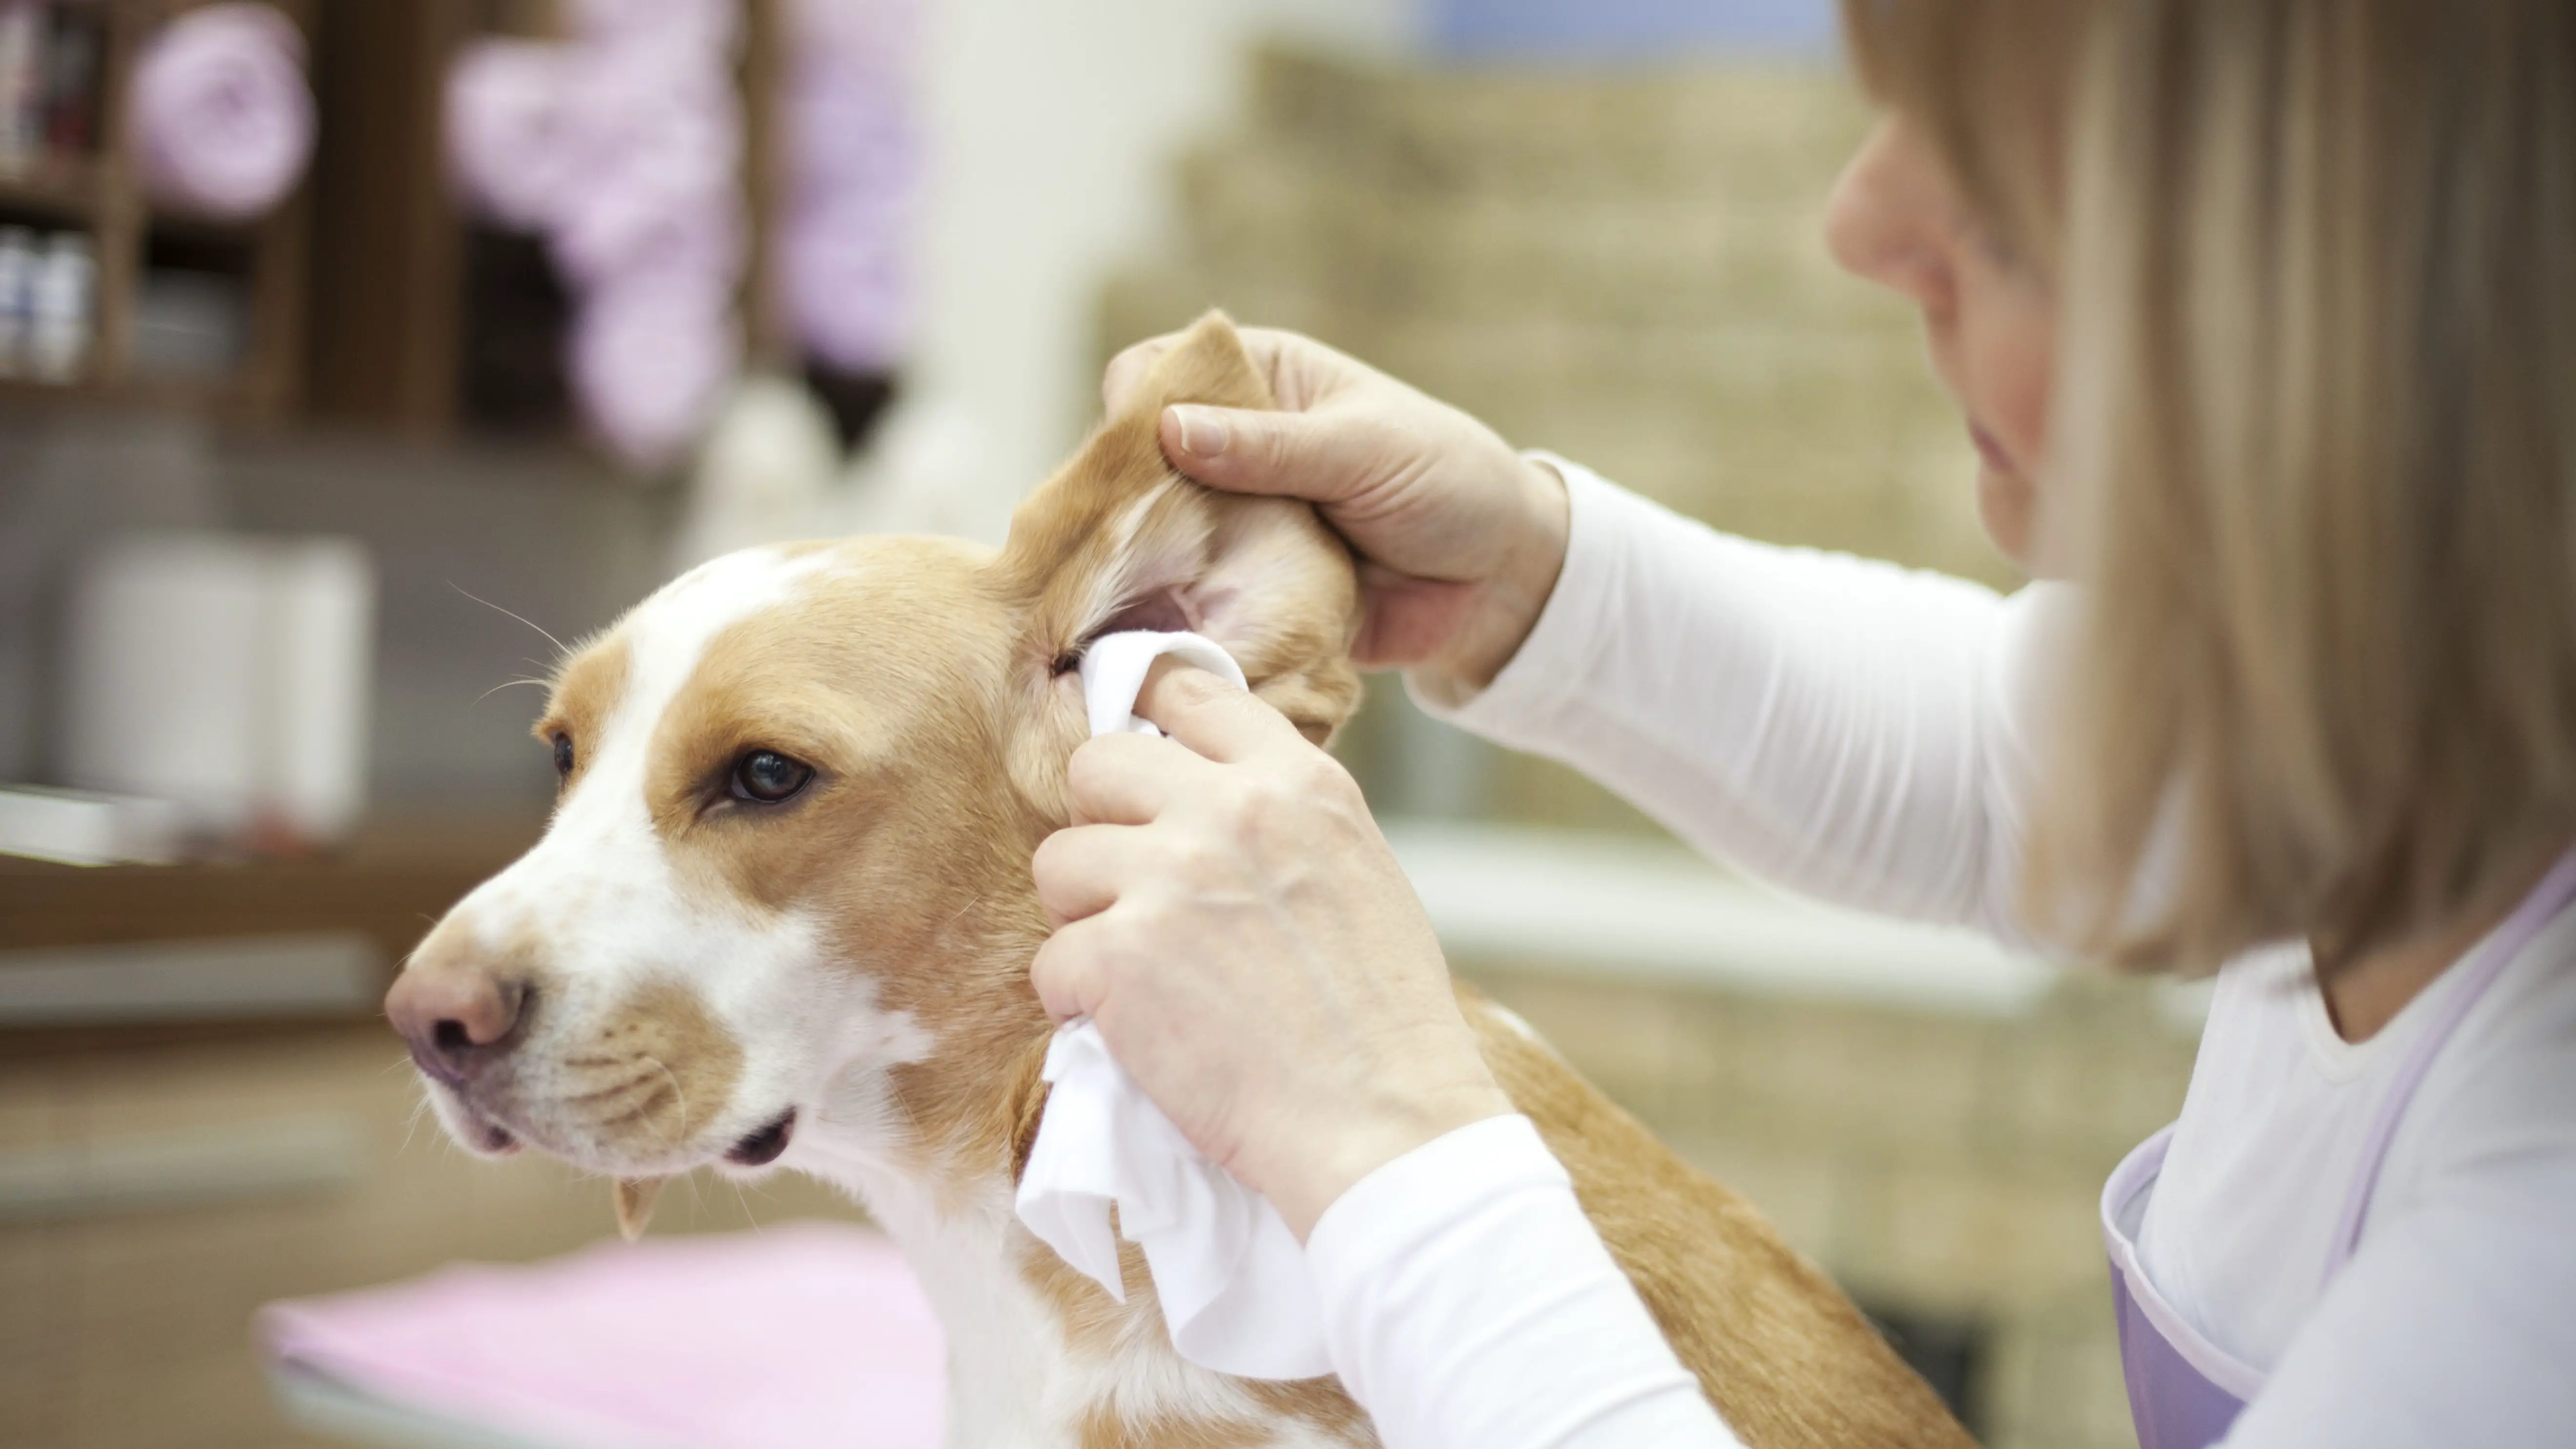 How to Clean Dog Ears with Hydrogen Peroxide: The Best Way |